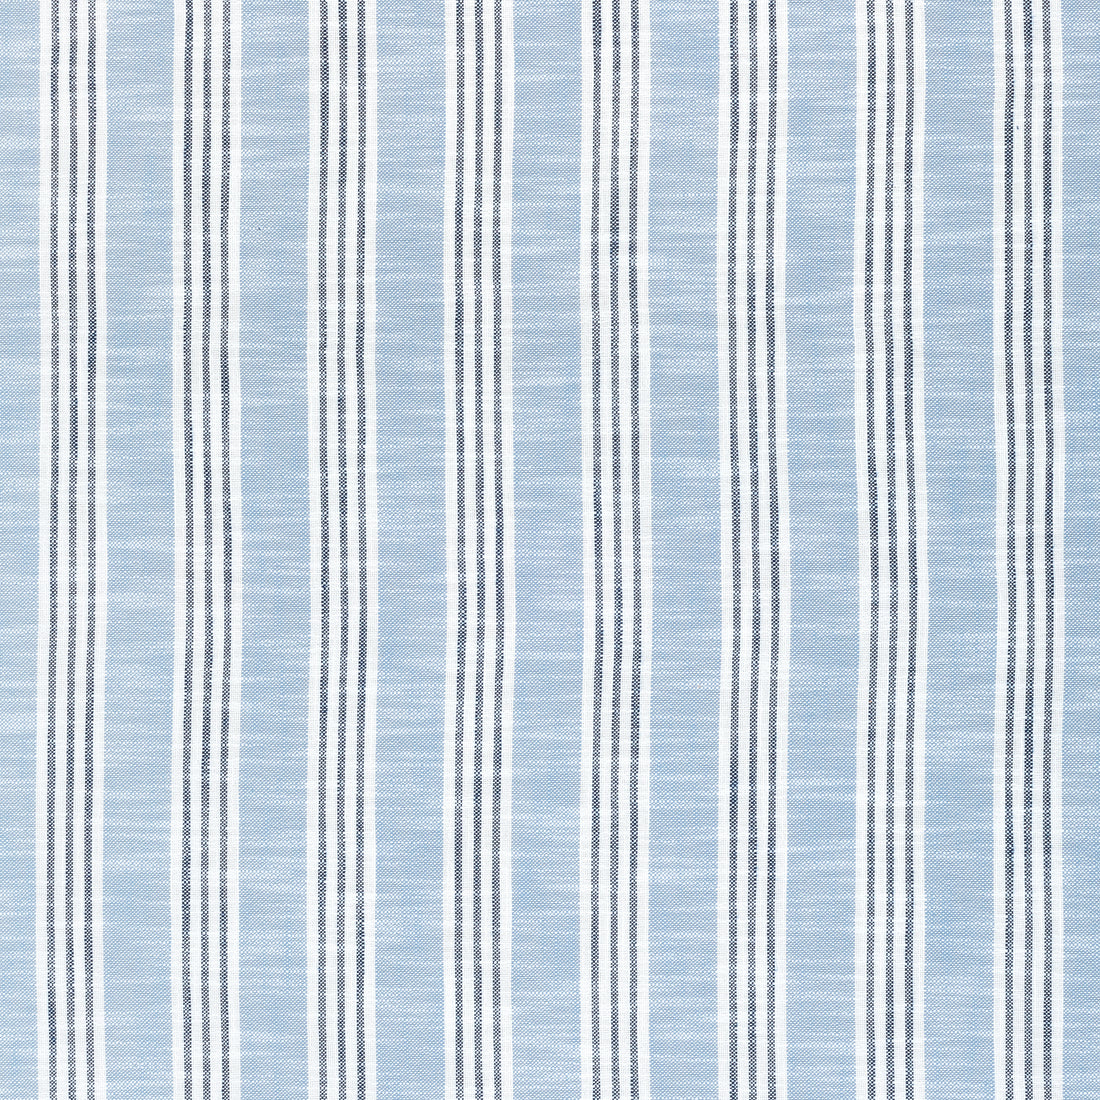 Southport Stripe fabric in sky blue and navy color - pattern number W73488 - by Thibaut in the Landmark collection